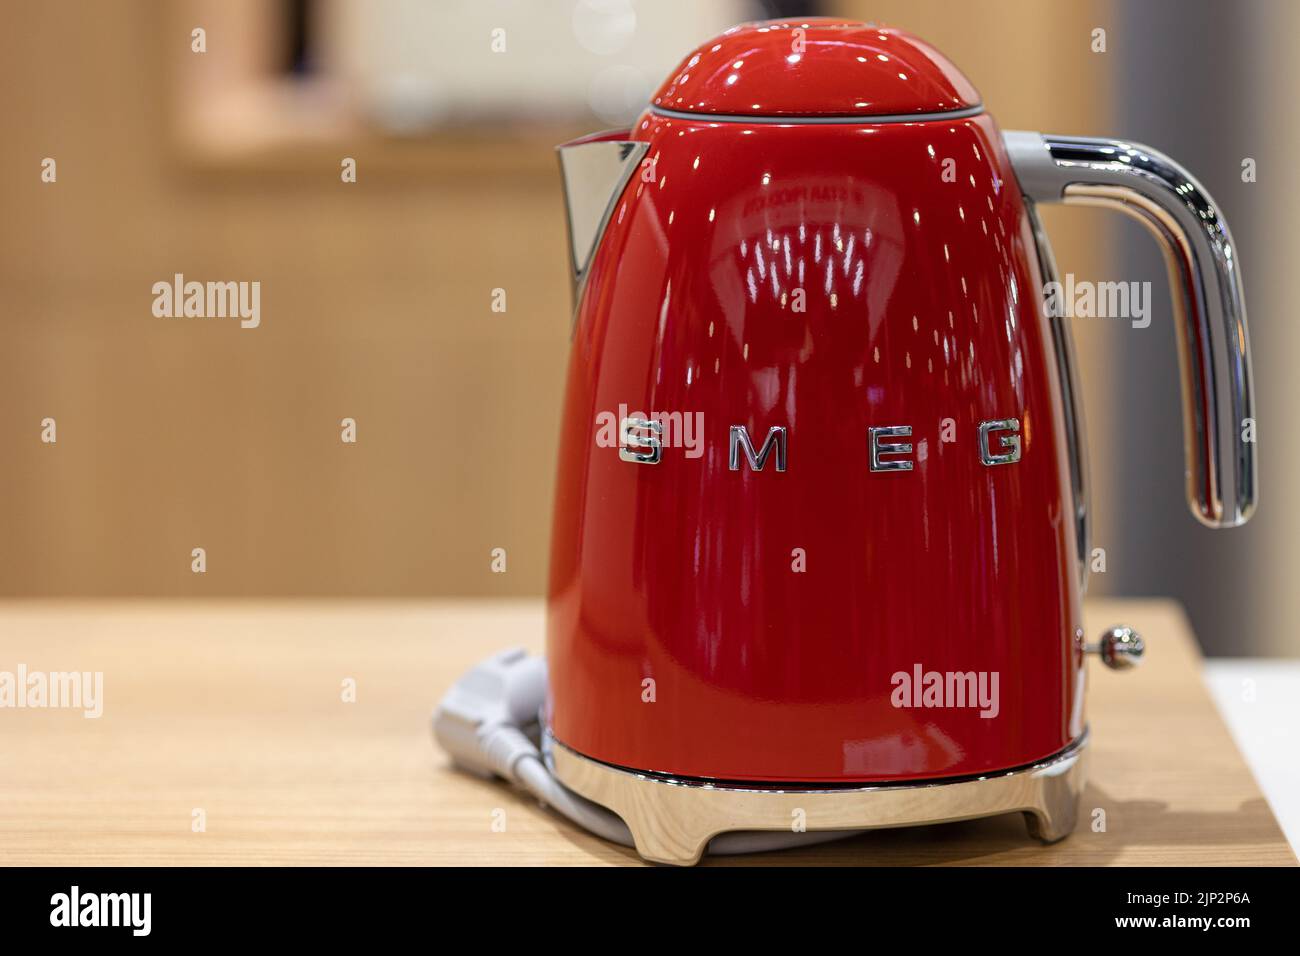 https://c8.alamy.com/comp/2JP2P6A/smeg-kettle-modern-italy-home-appliances-metalworking-company-founded-in-194825-may-2022bangkok-thailand-2JP2P6A.jpg